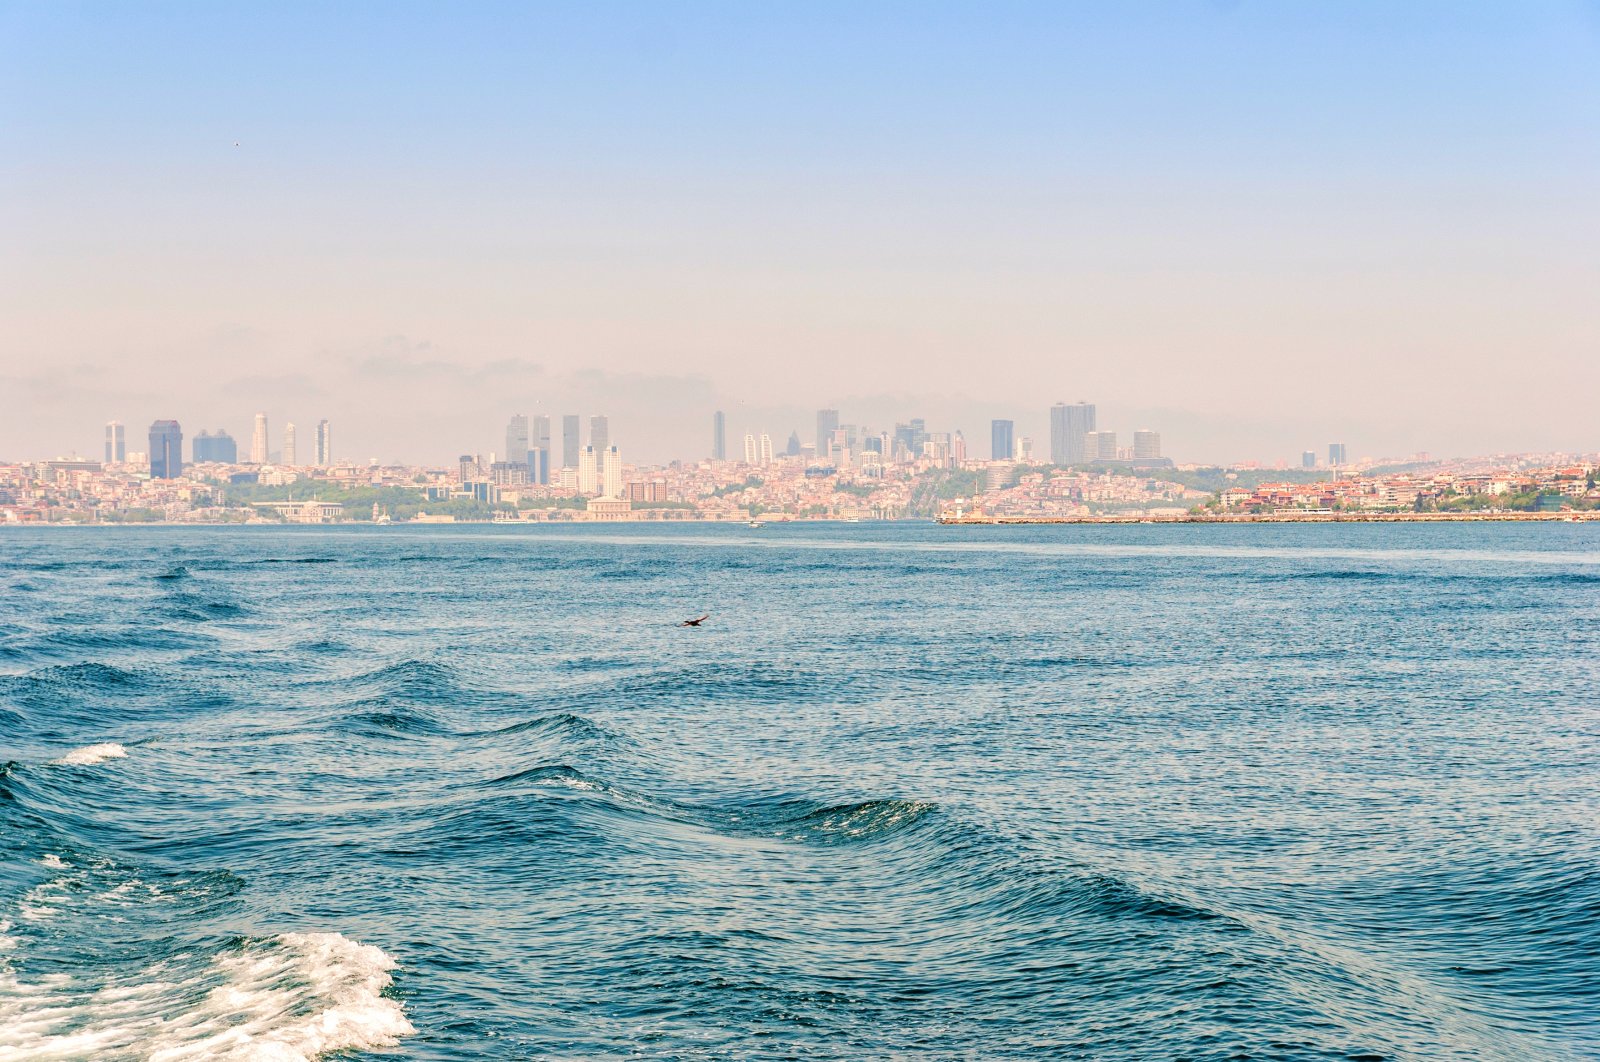 A general view of the Marmara Sea backdropped by skyscrapers in the business center of Istanbul, Türkiye. (Shutterstock Photo)